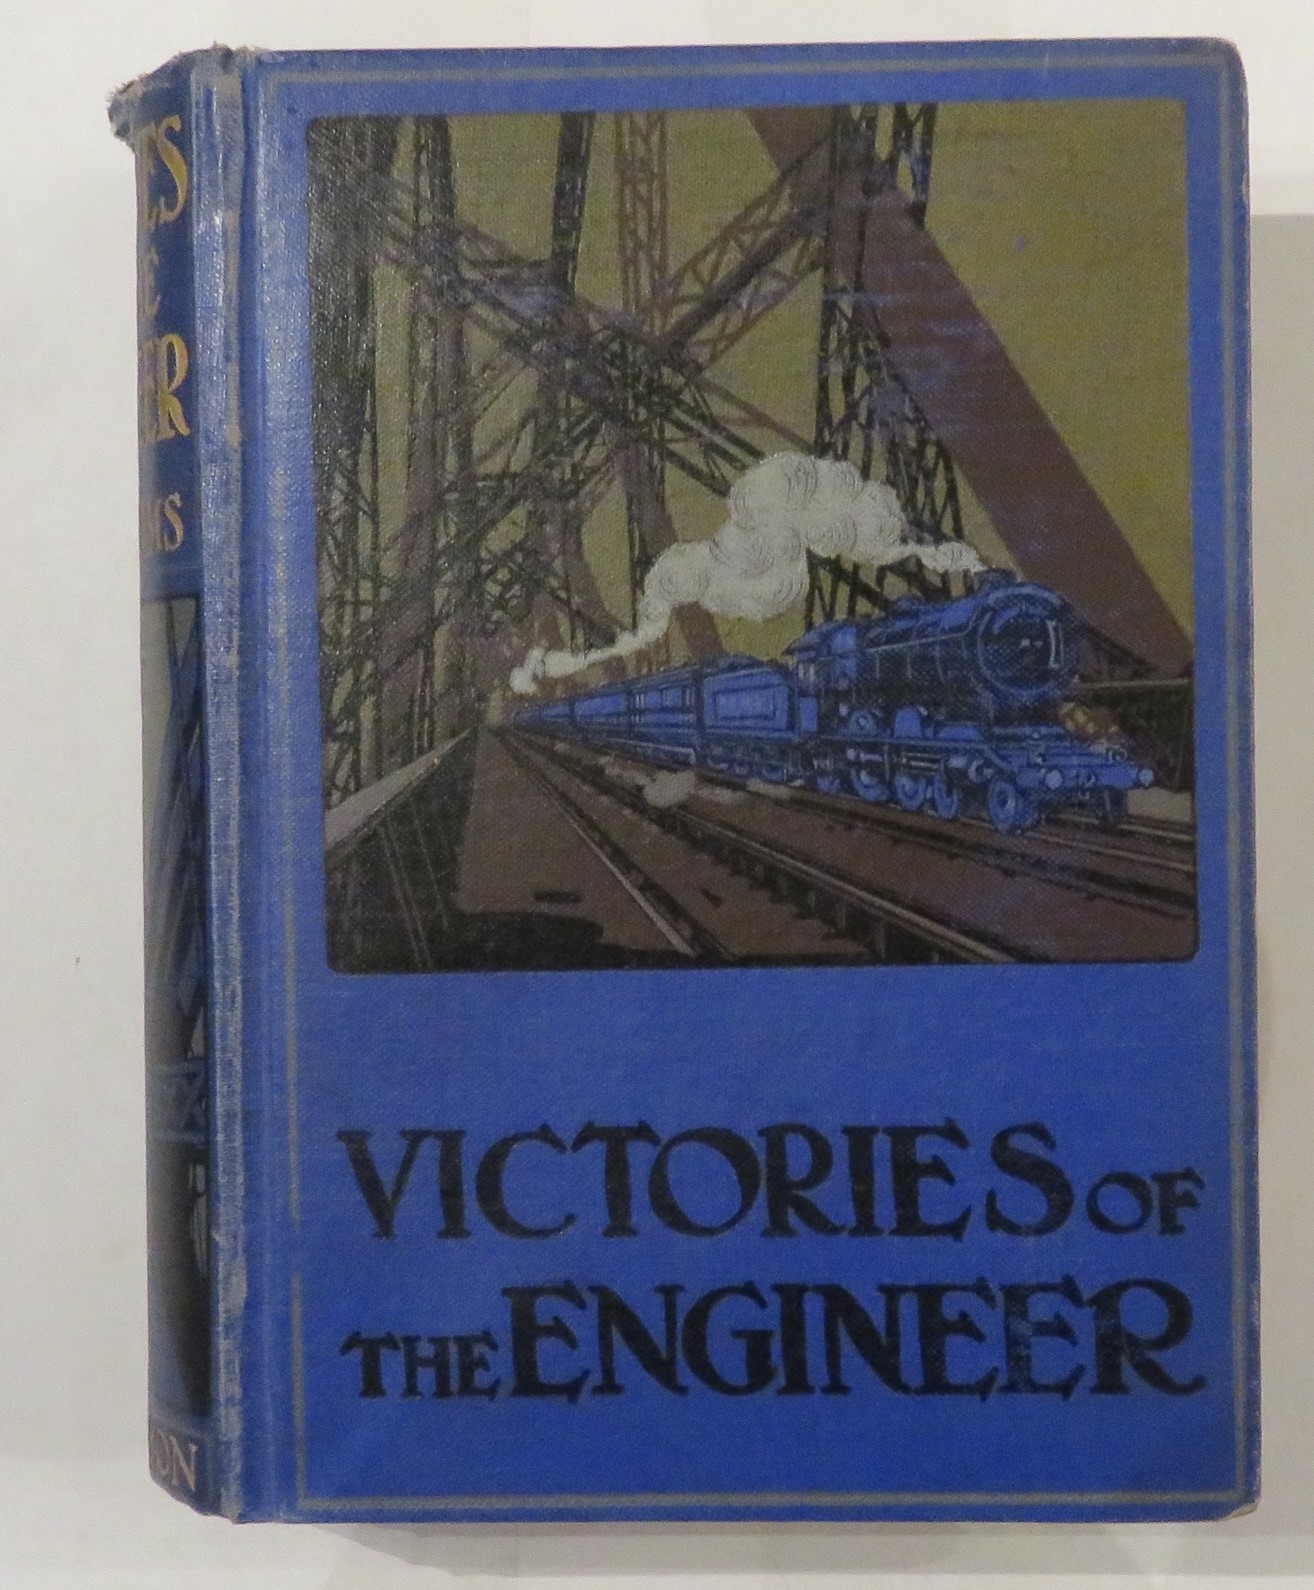 Victories of the Engineer